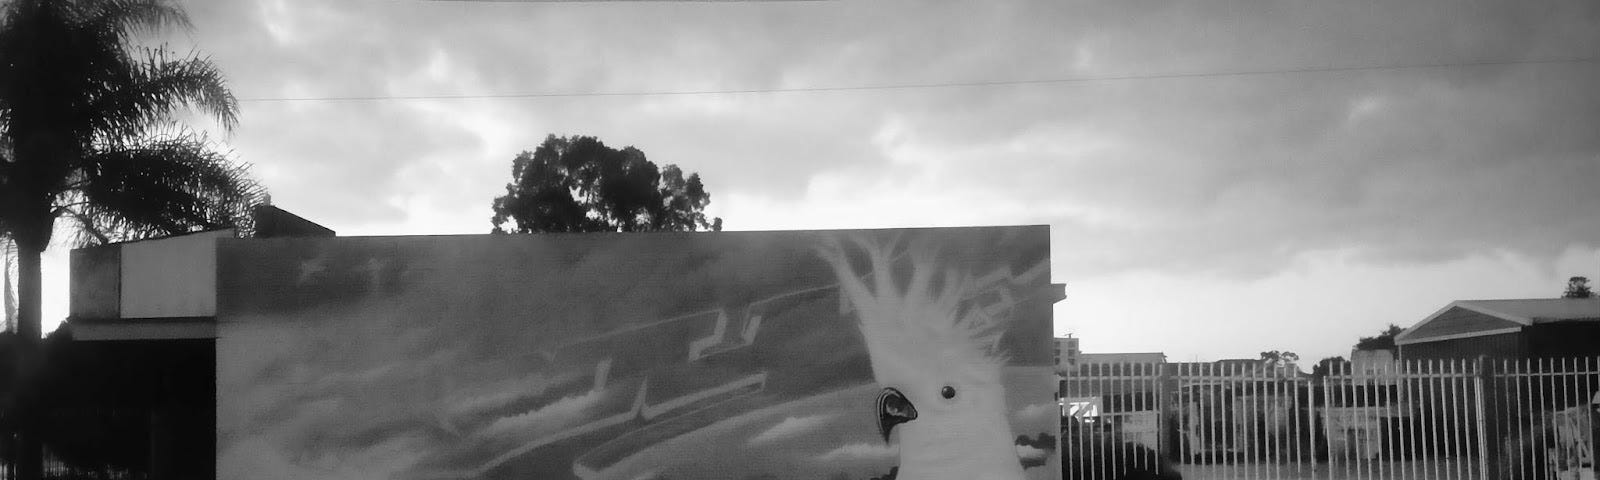 A deserted street in front of a wall with a black and white mural. The mural depicts a bird with a prominent crest, possibly a cockatoo, against an abstract background suggesting movement or wind. In the background, some buildings and a metal fence are visible, while the cloudy sky adds to a melancholic and calm atmosphere.